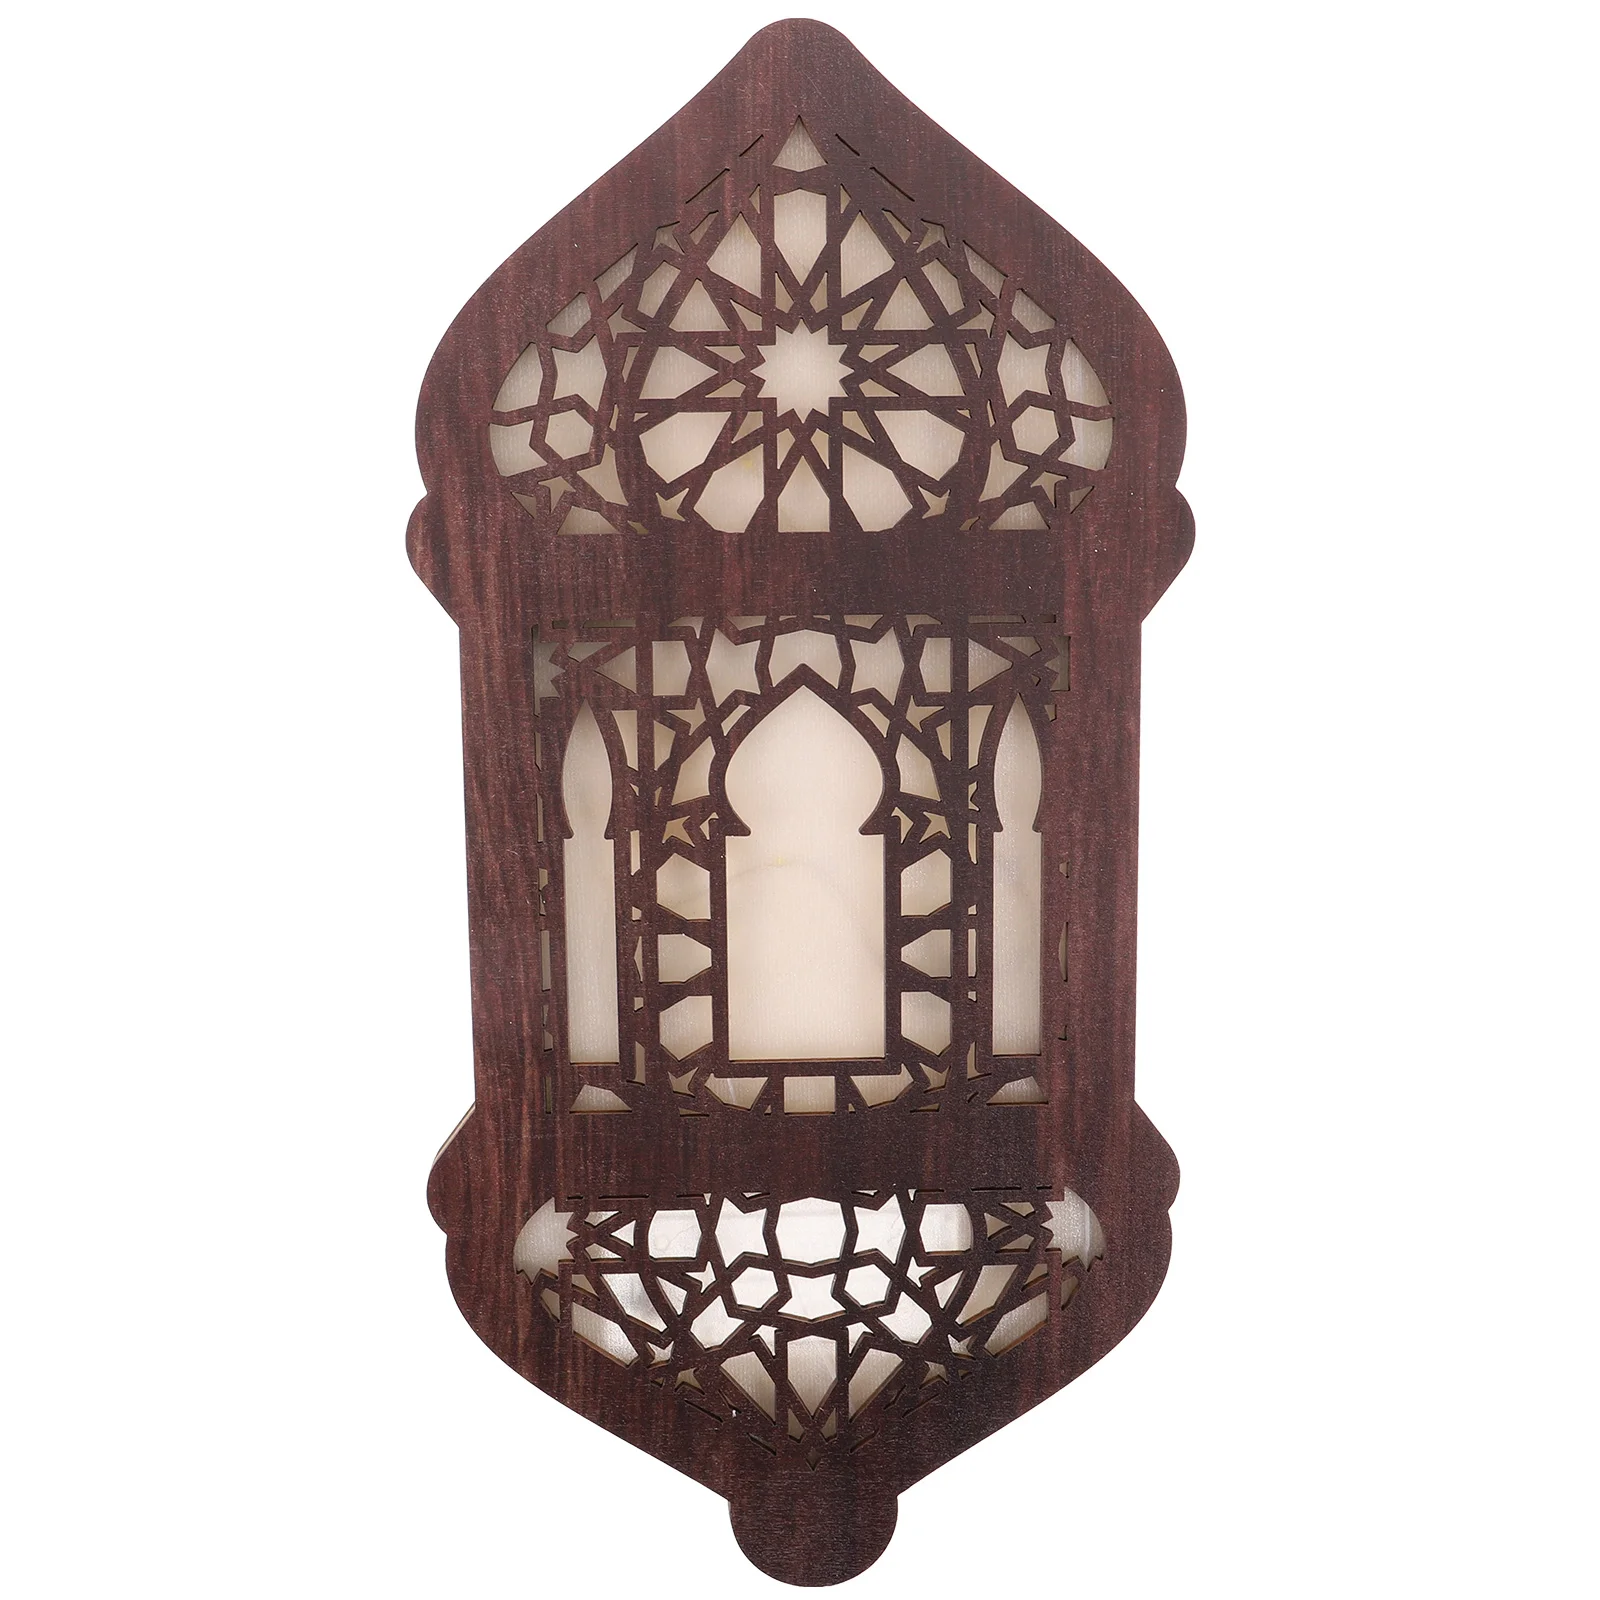 

Nationality Bathroom Decorations Ramadan Islamic Party Supplies Wooden Vintage Wall Ornament